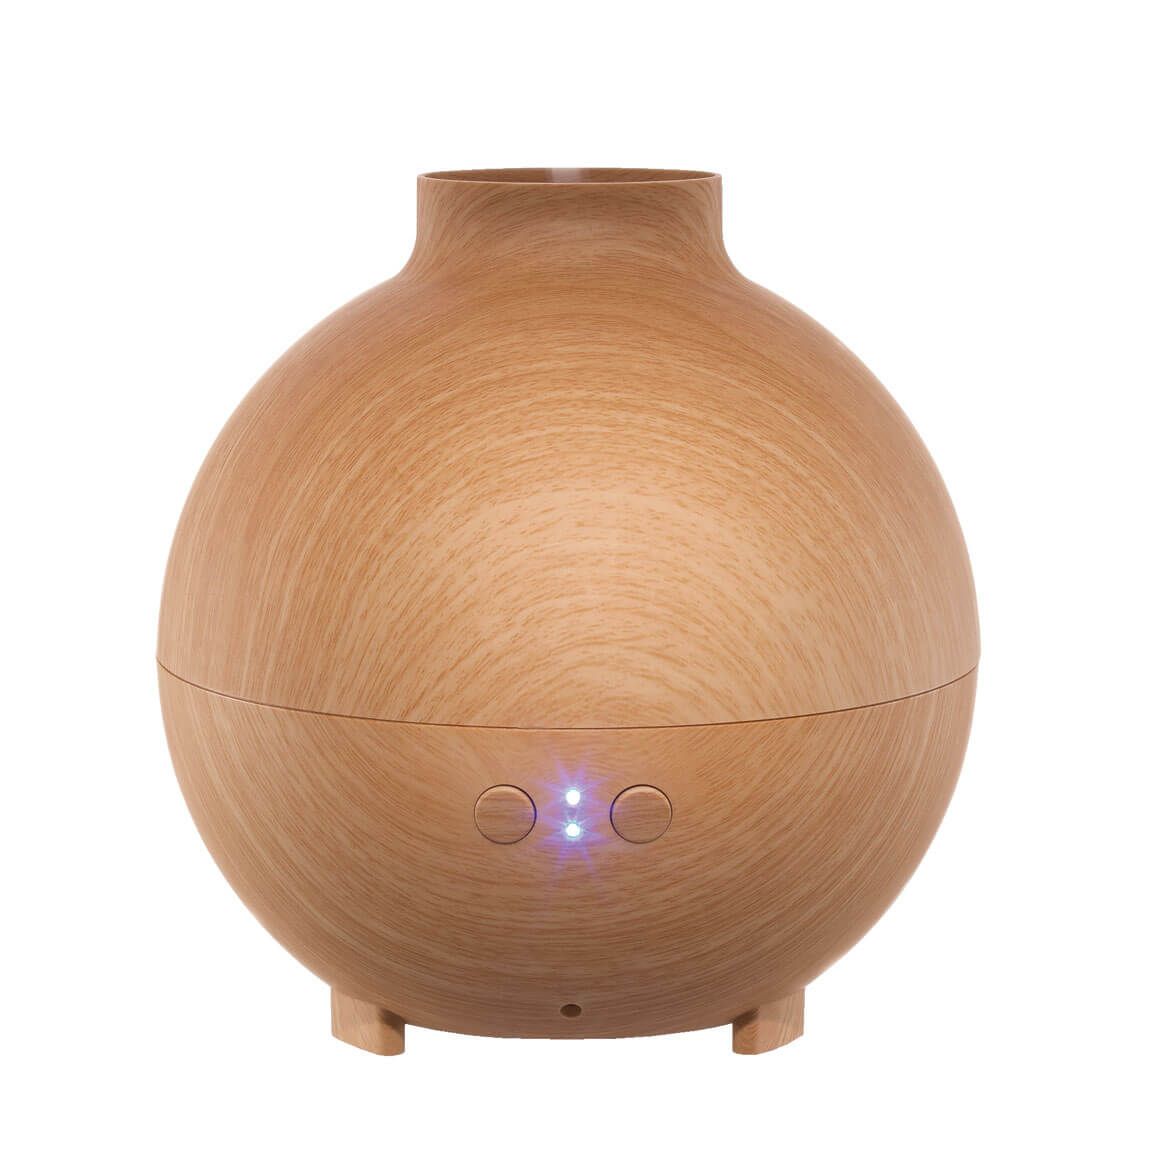 Lighted Essential Oil Diffuser & Humidifier, 600 ml + '-' + 356189